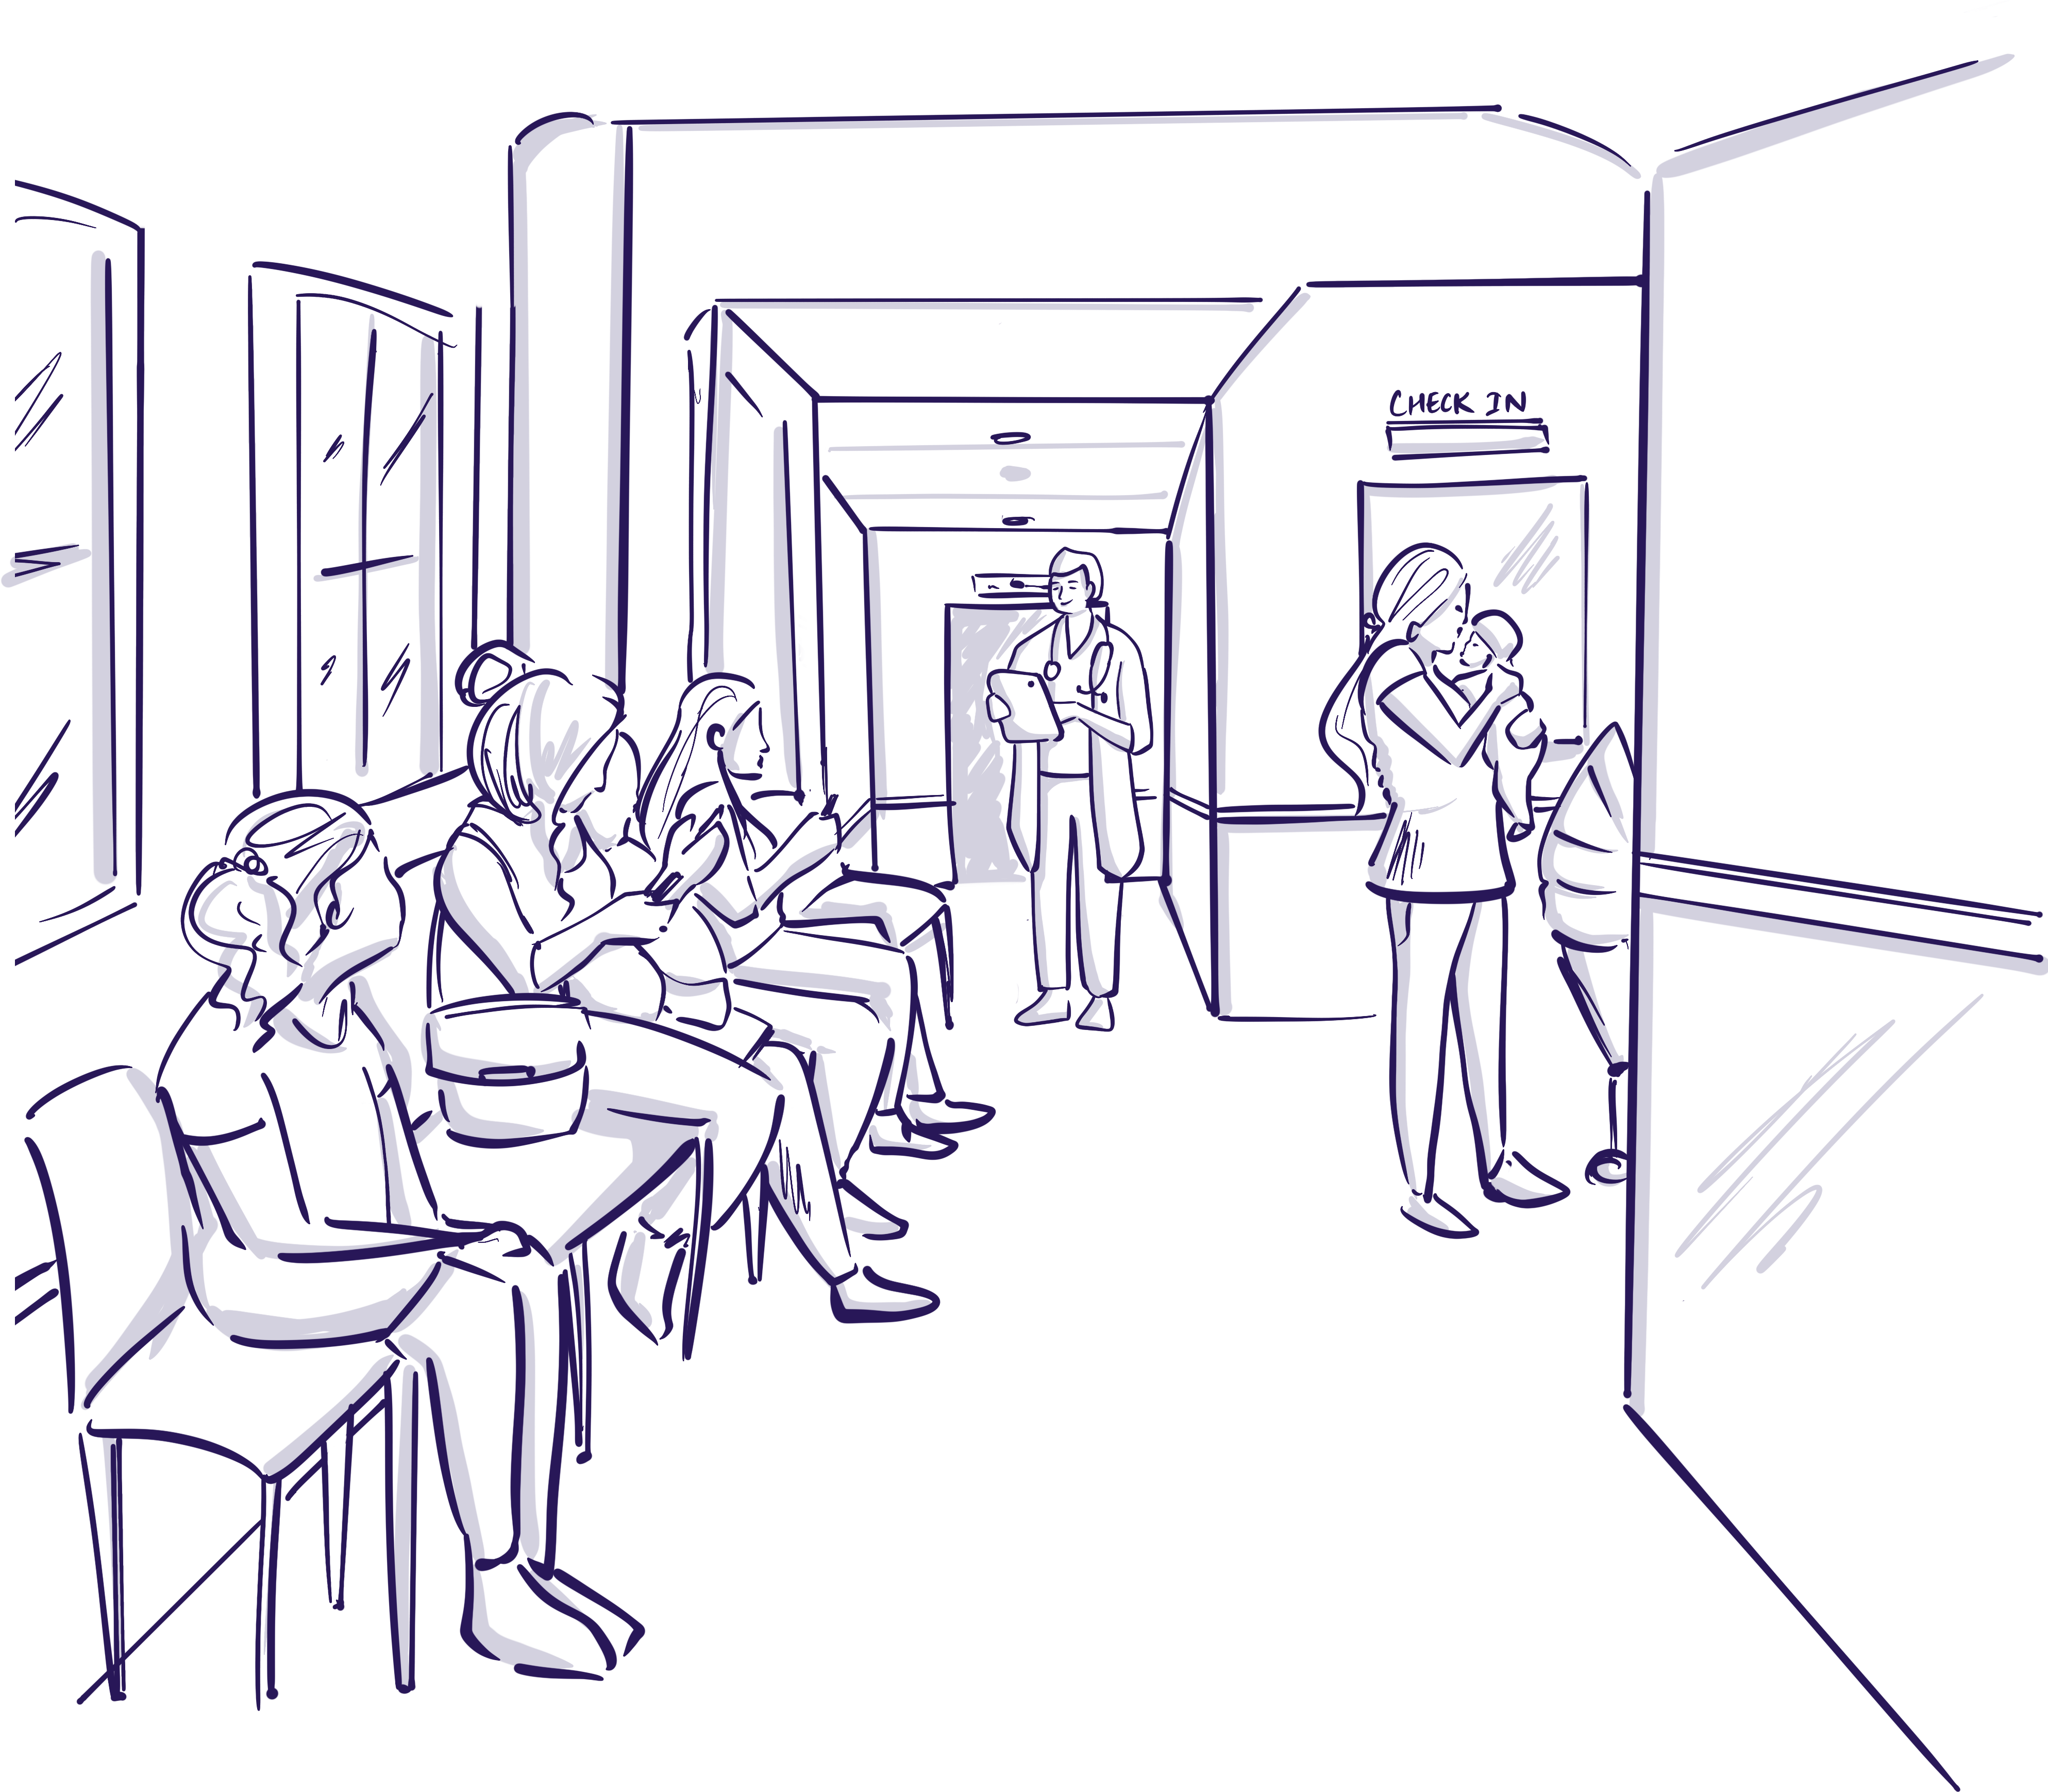 Illustration image of people sitting in a waiting room